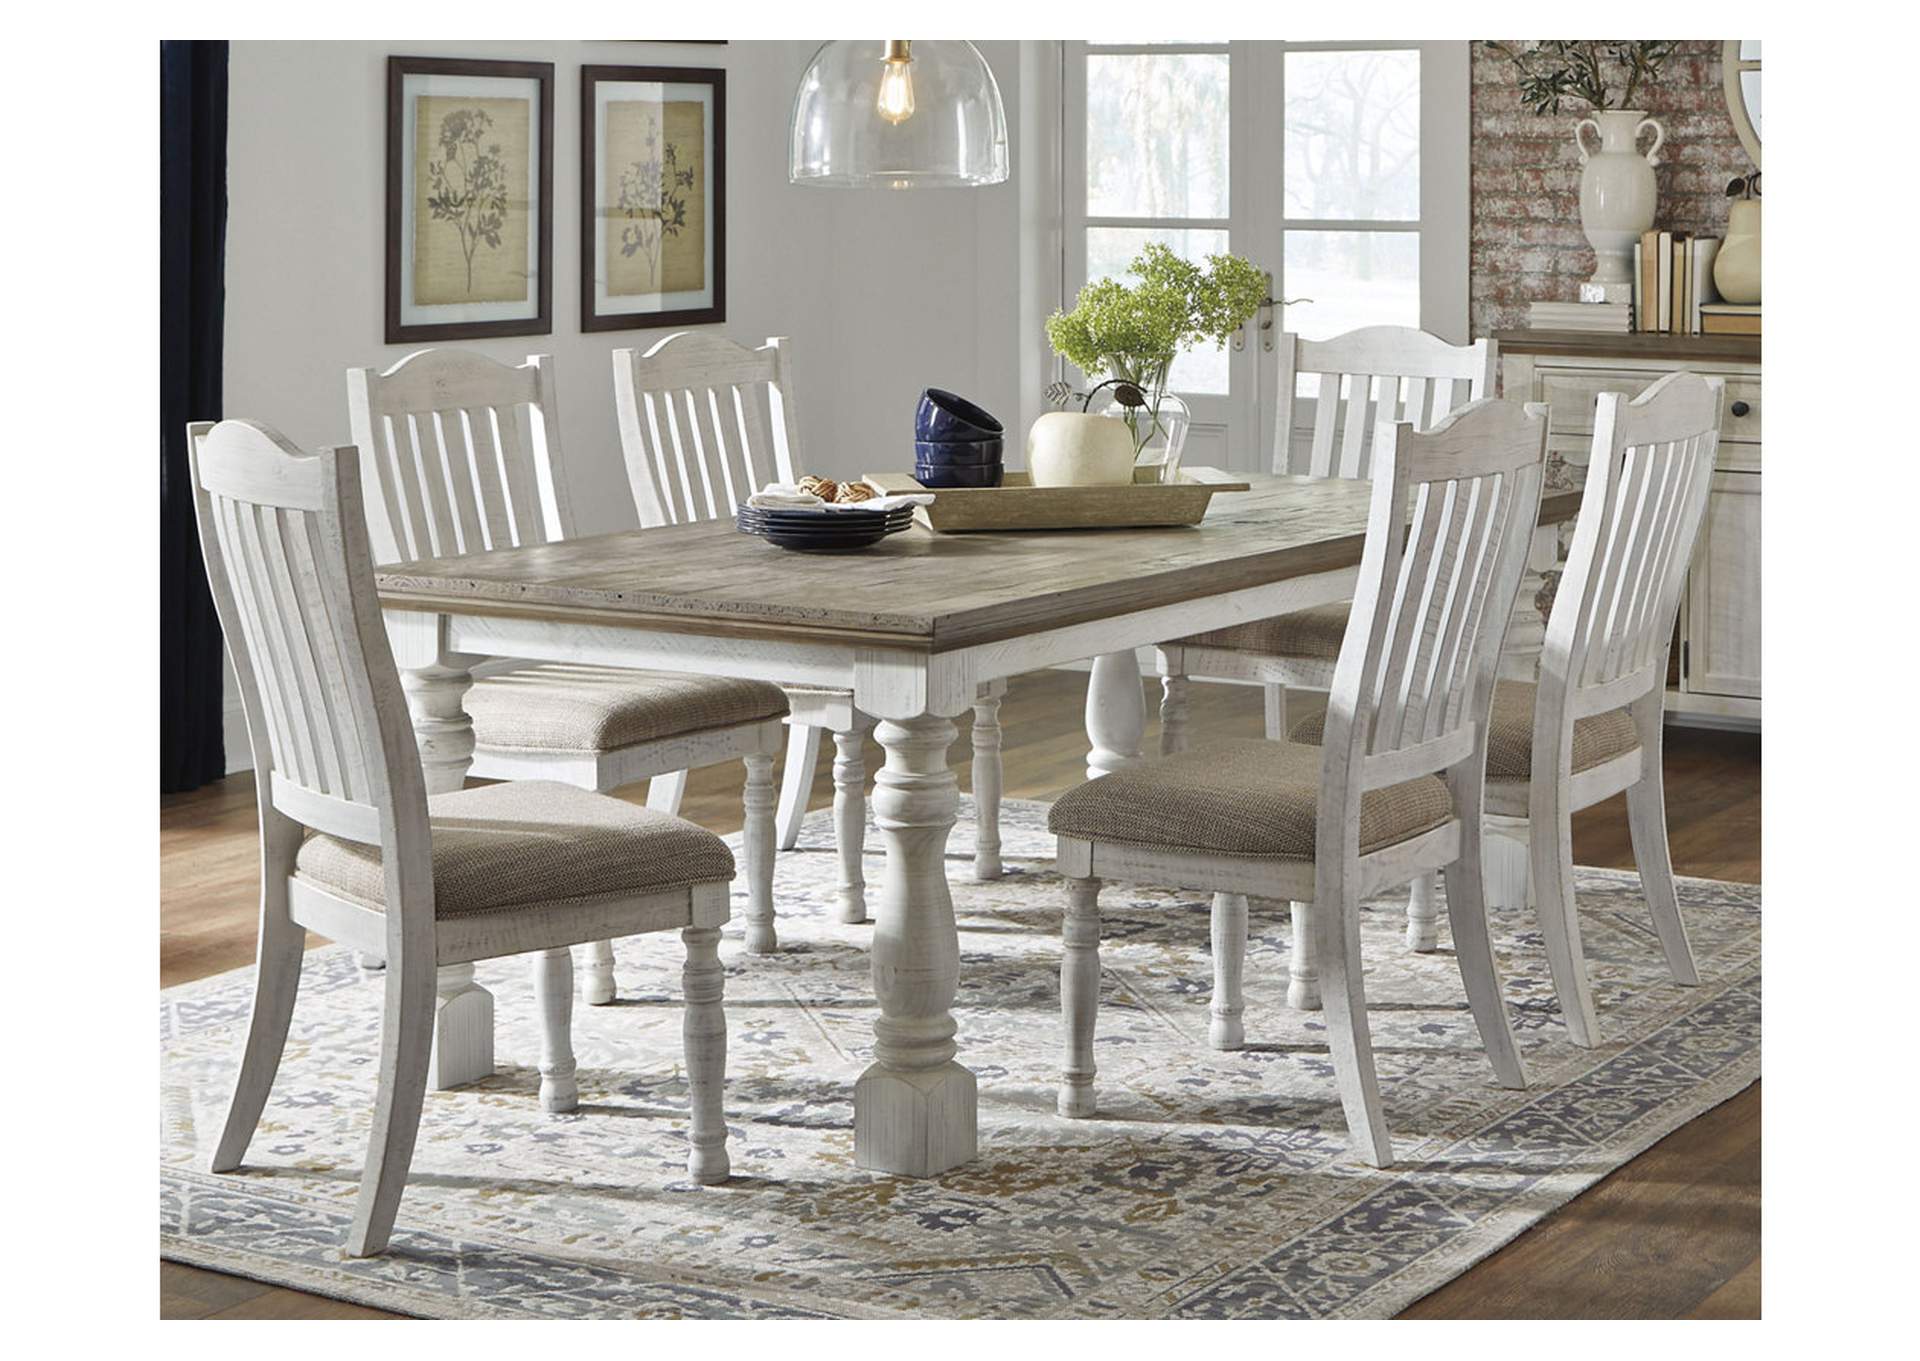 Havalance Dining Table and 6 Chairs,Millennium